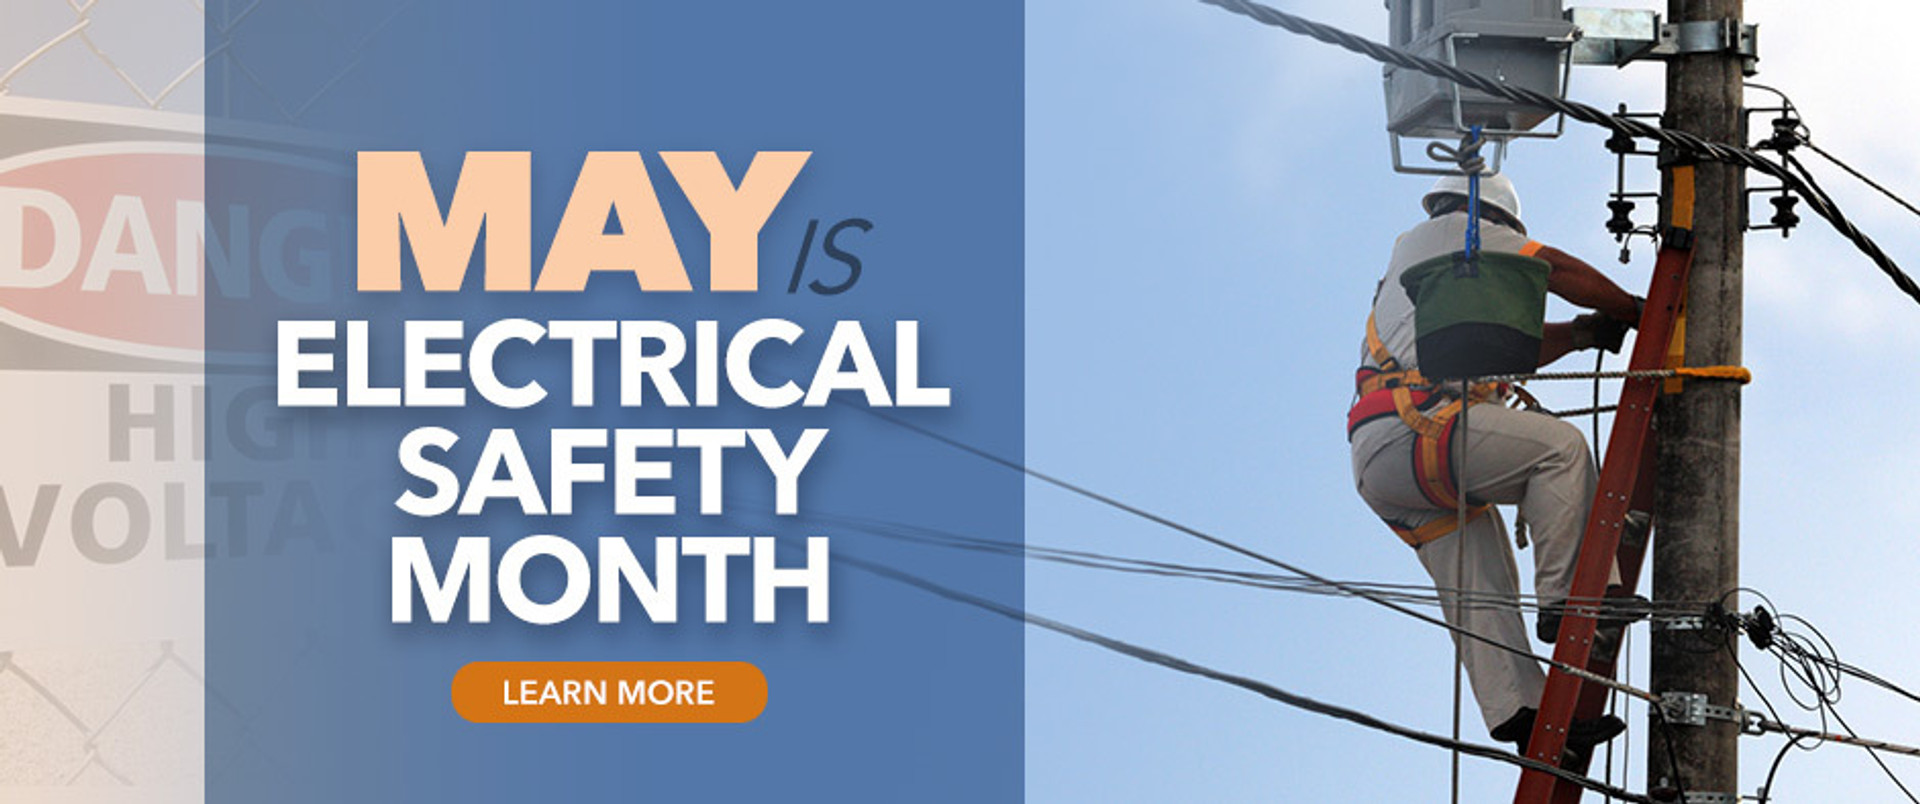 May is Electrical Safety Month - Learn More